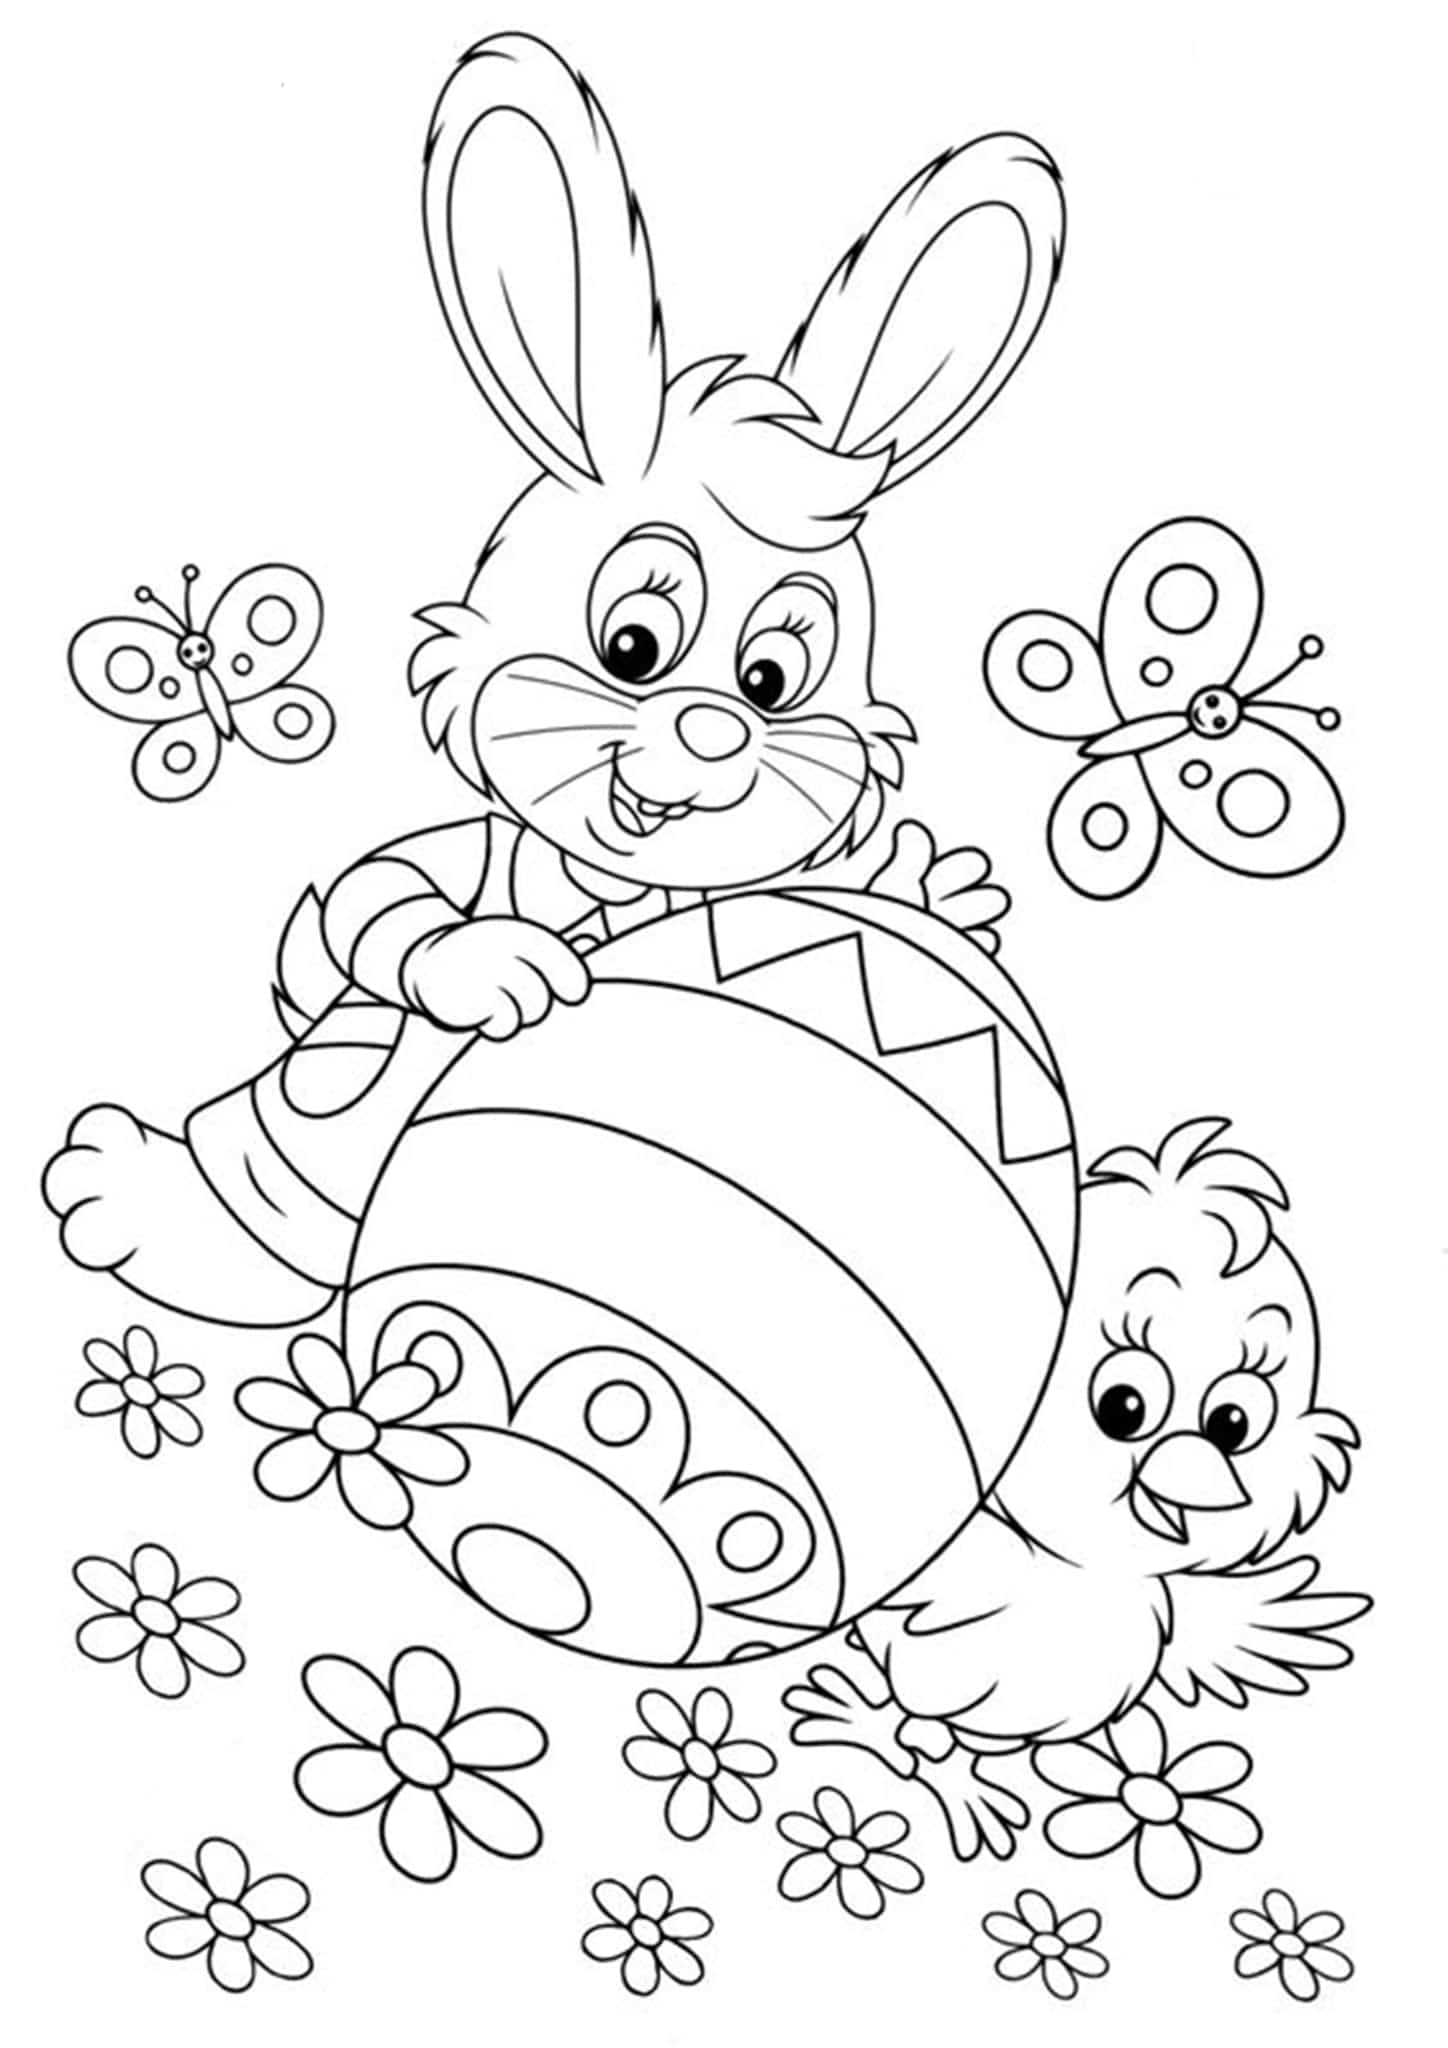 free-easy-to-print-bunny-coloring-pages-tulamama